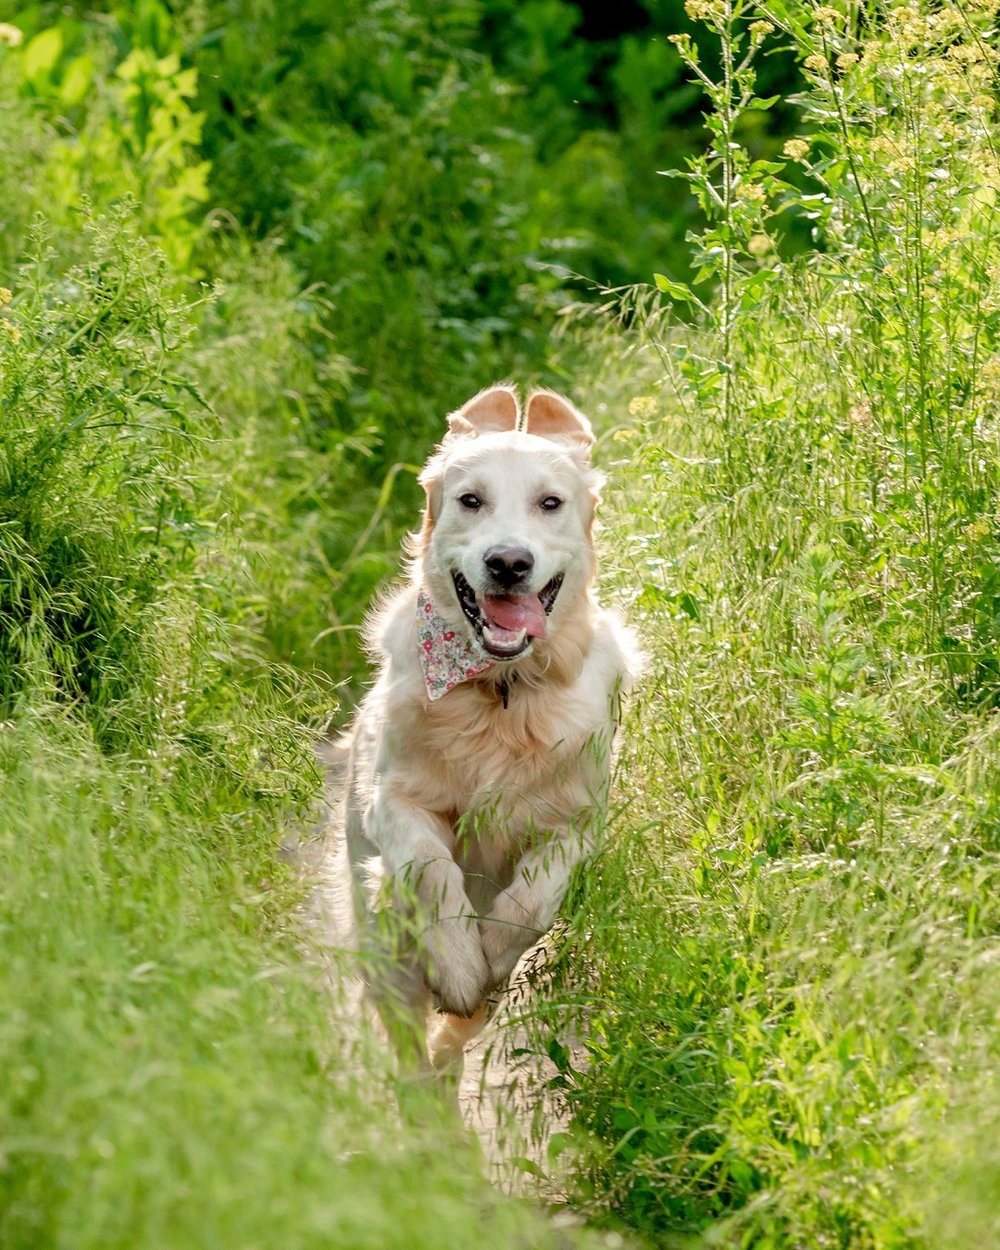 Spend Earth Day enjoying our beautiful world as much as this guy is enjoying his field frolic 🐕 Let us know what you find when you go exploring today!

#EvolvePets #ChooseEvolve #EarthDay24